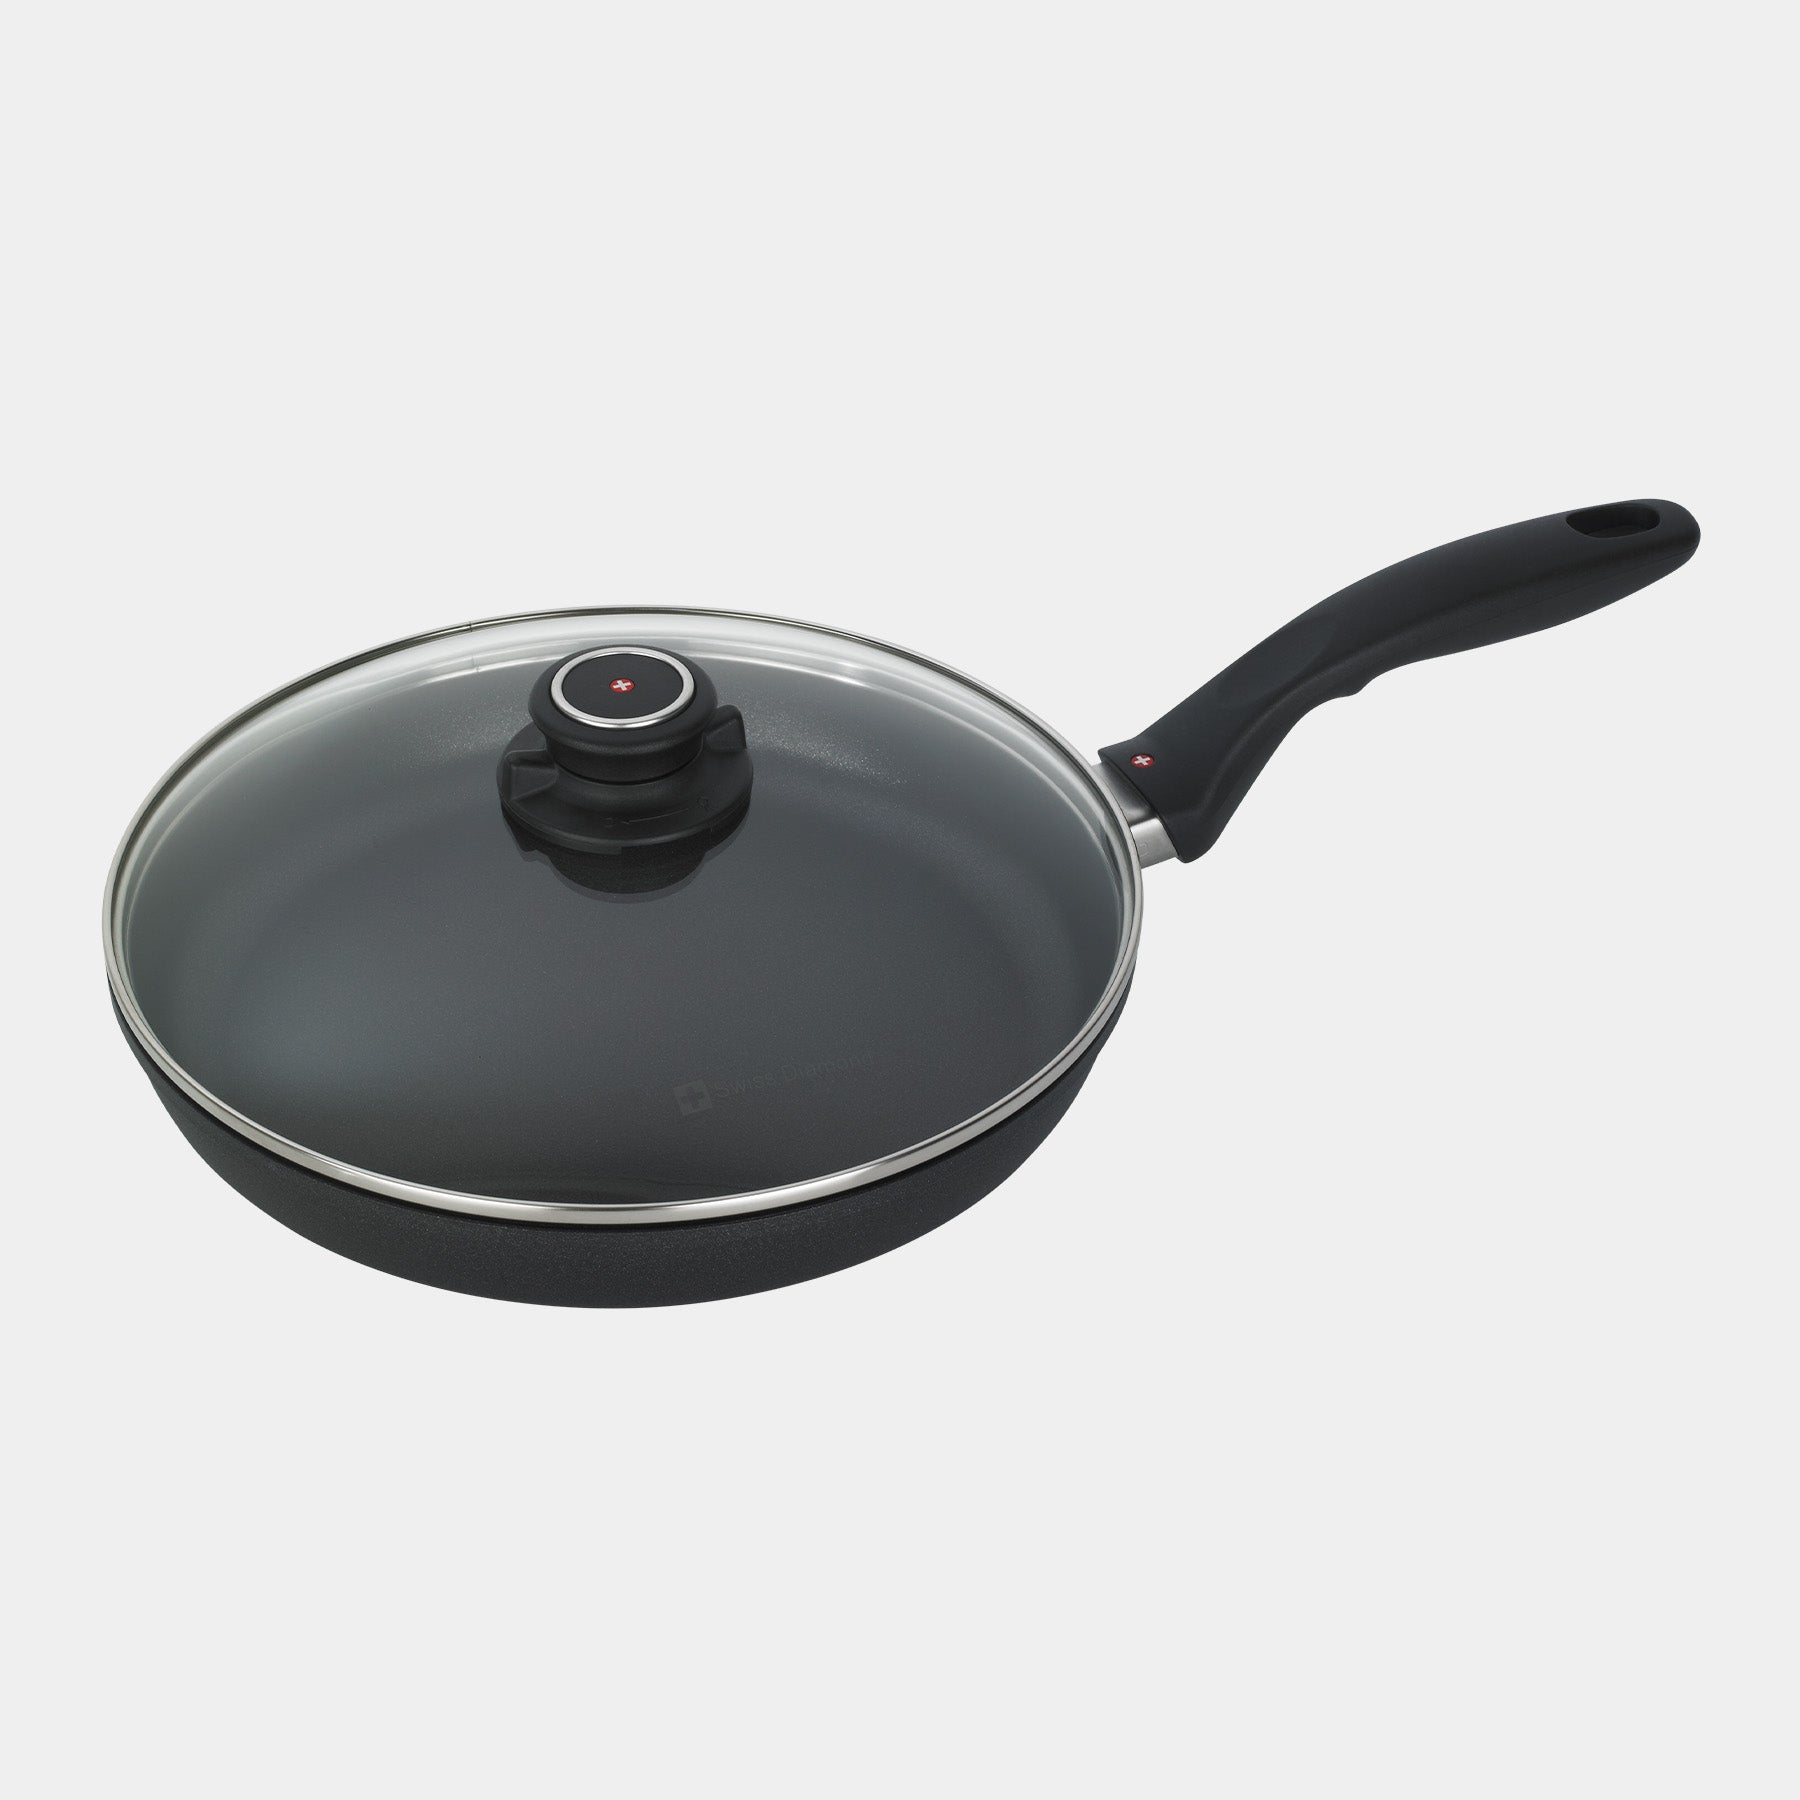 XD Nonstick 10.25" Fry Pan with glass lid - Induction top view